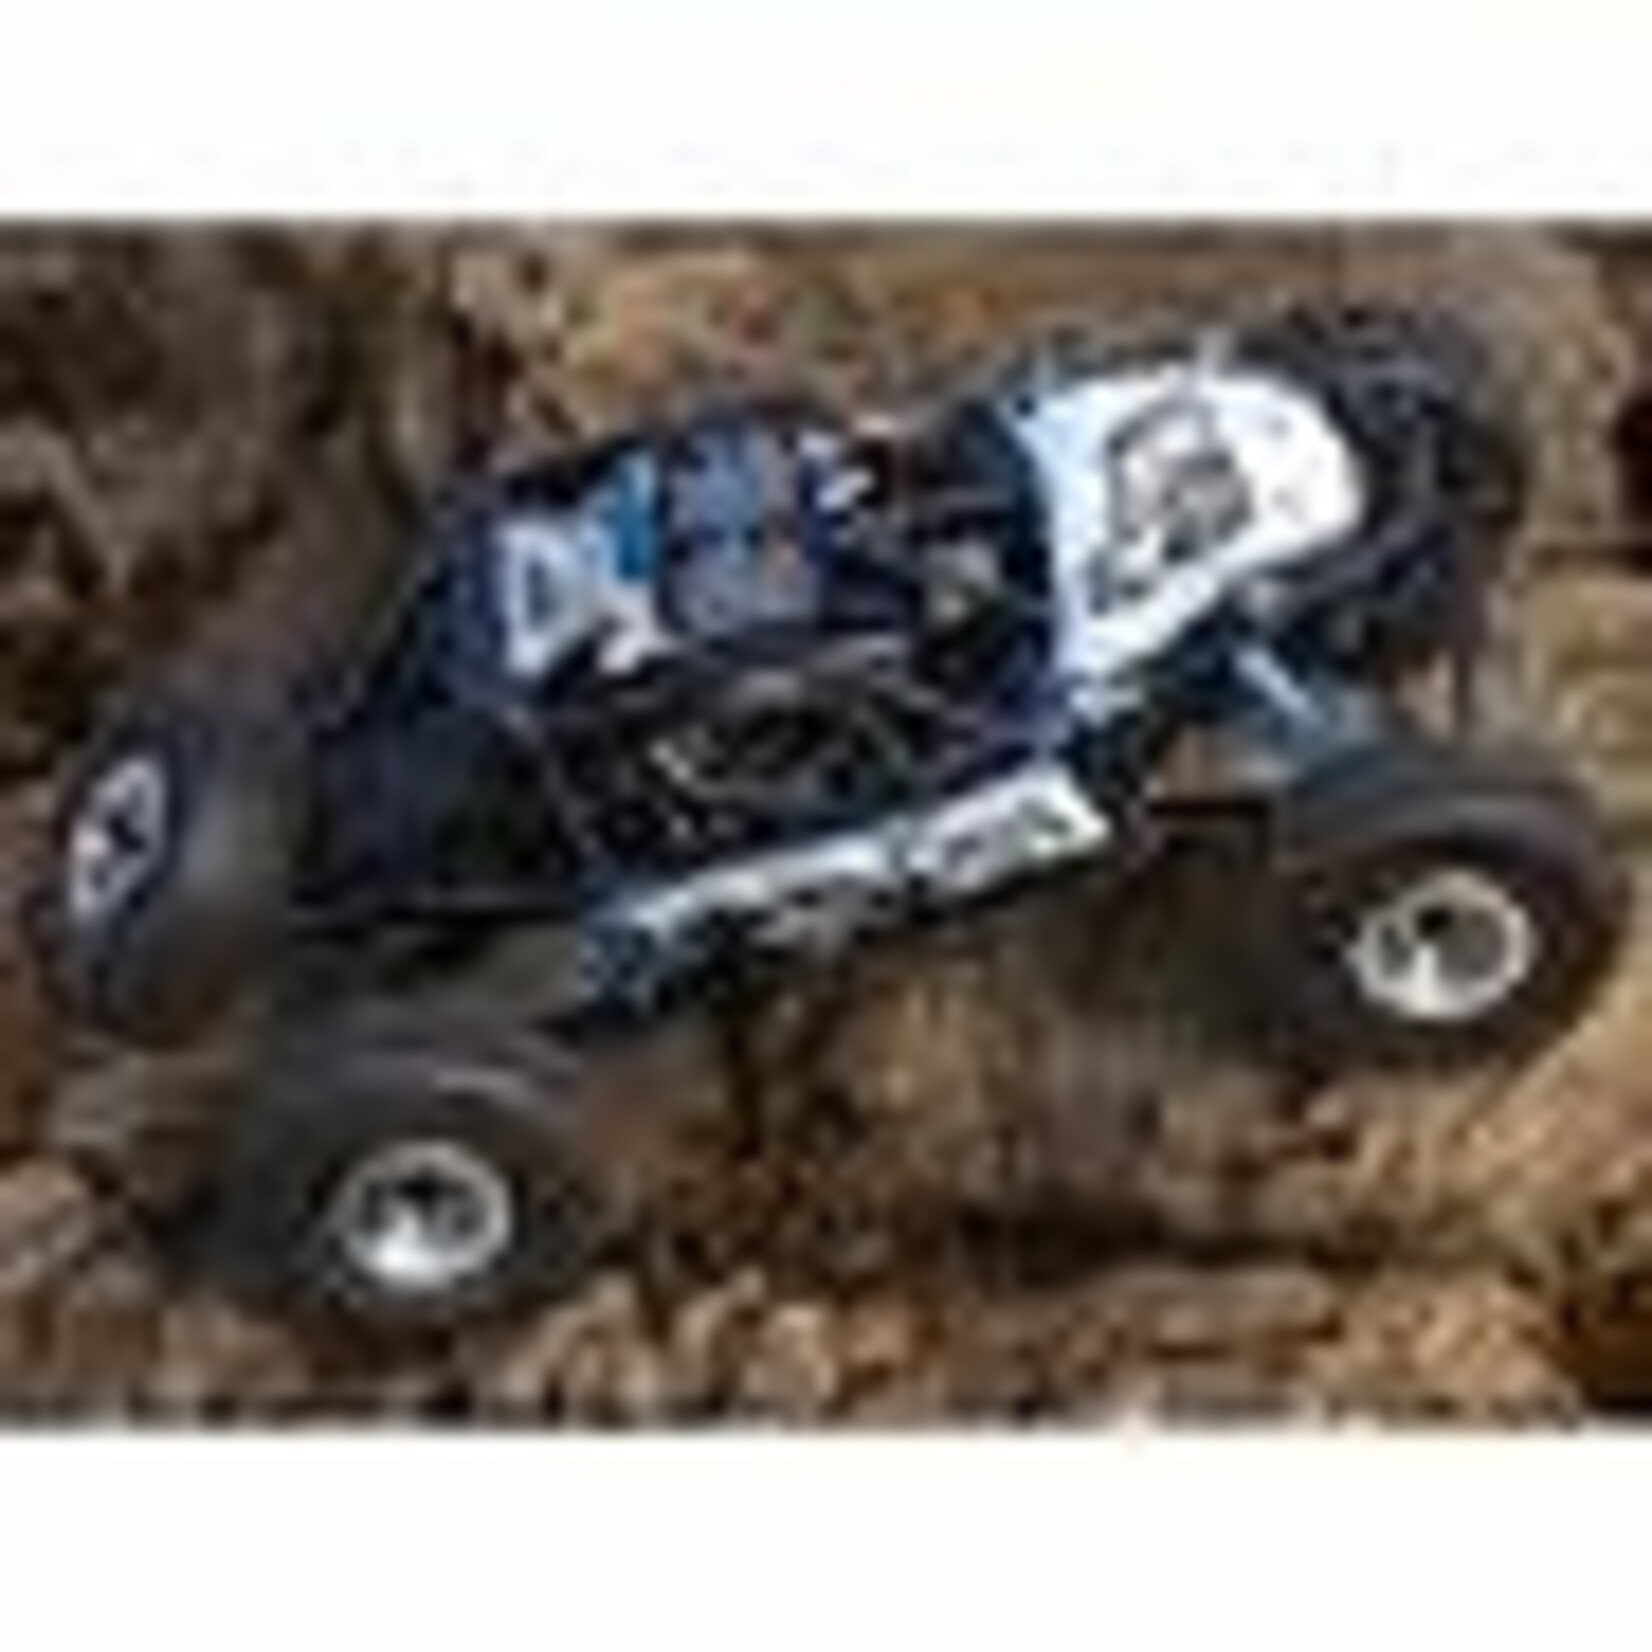 AXIAL 1/10 RR10 Bomber KOH Limited Edition 4WD RTR